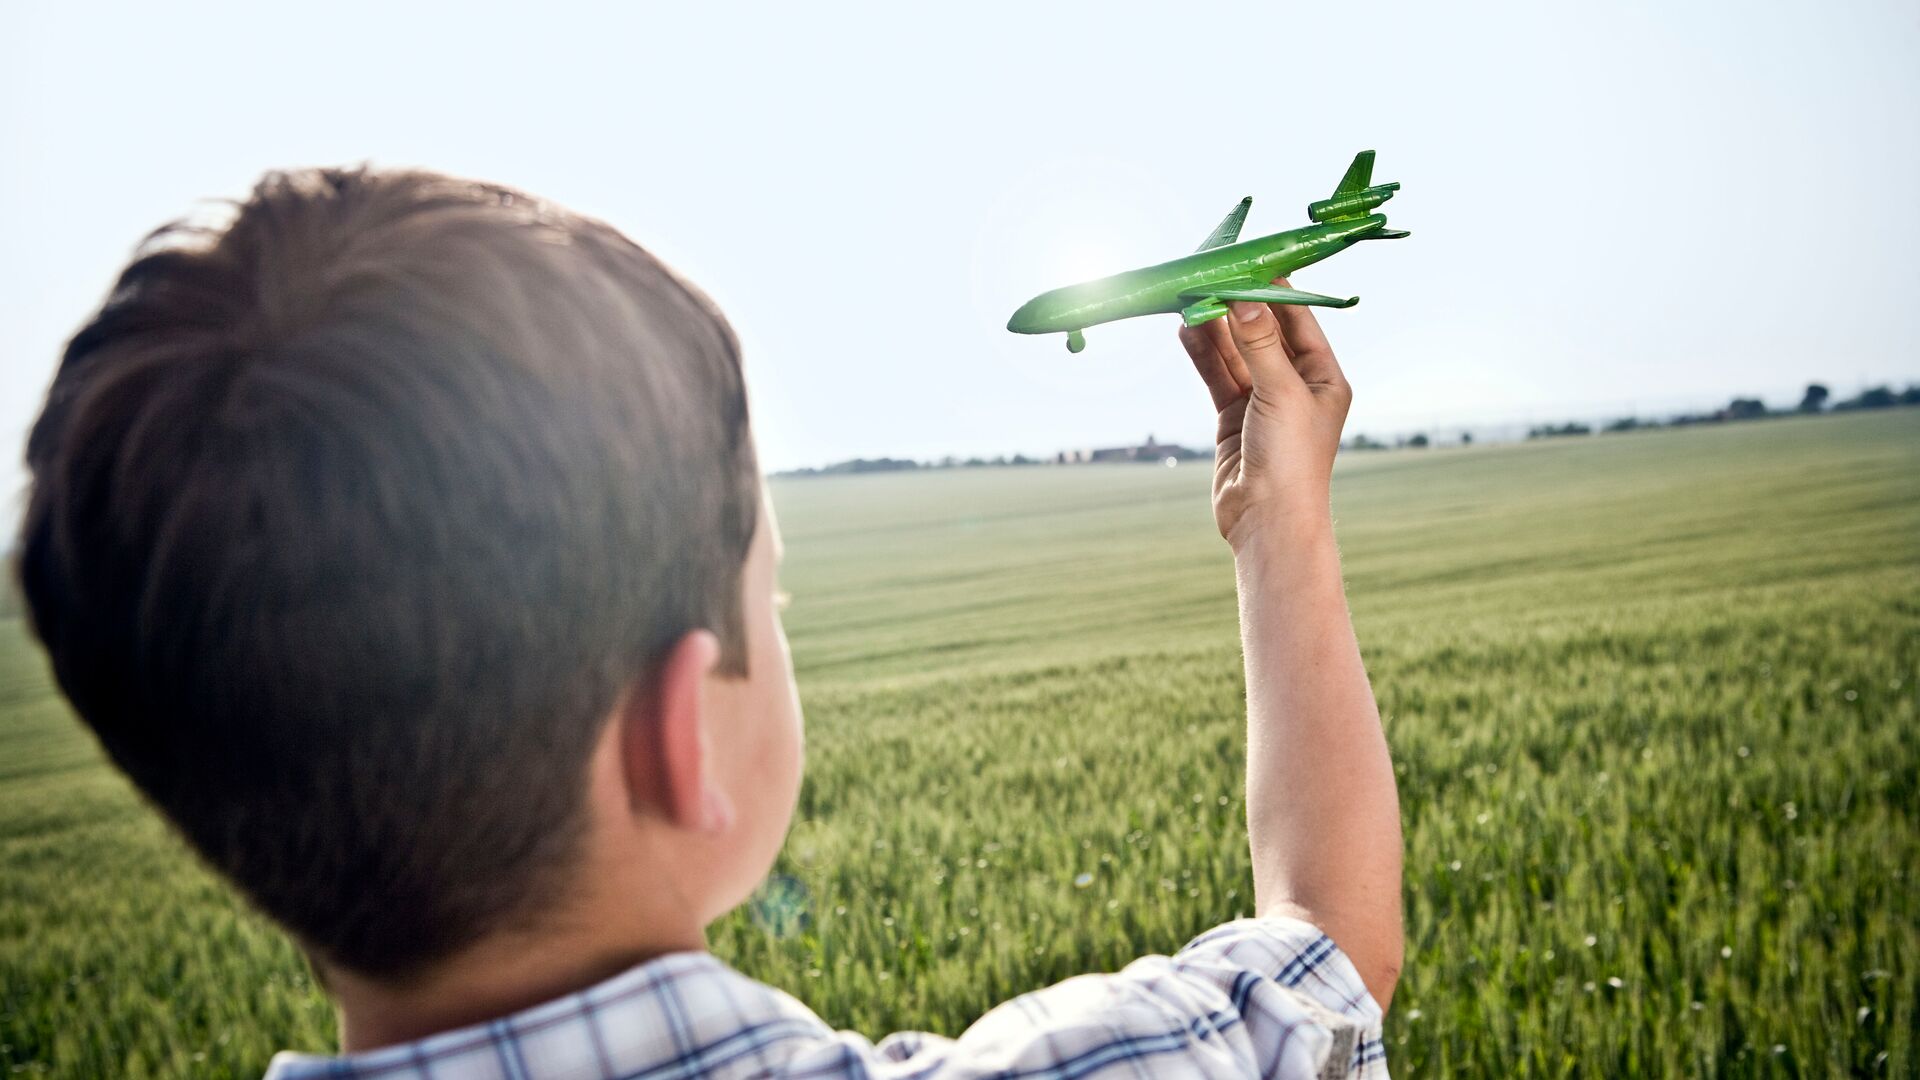 Boy playing with green paper plane in green field. The boy is flying the plane through the air. Sustainable air travel concept for a piece on sustainable aviation fuel and the aviation industries ESG & Net Zero commitments.